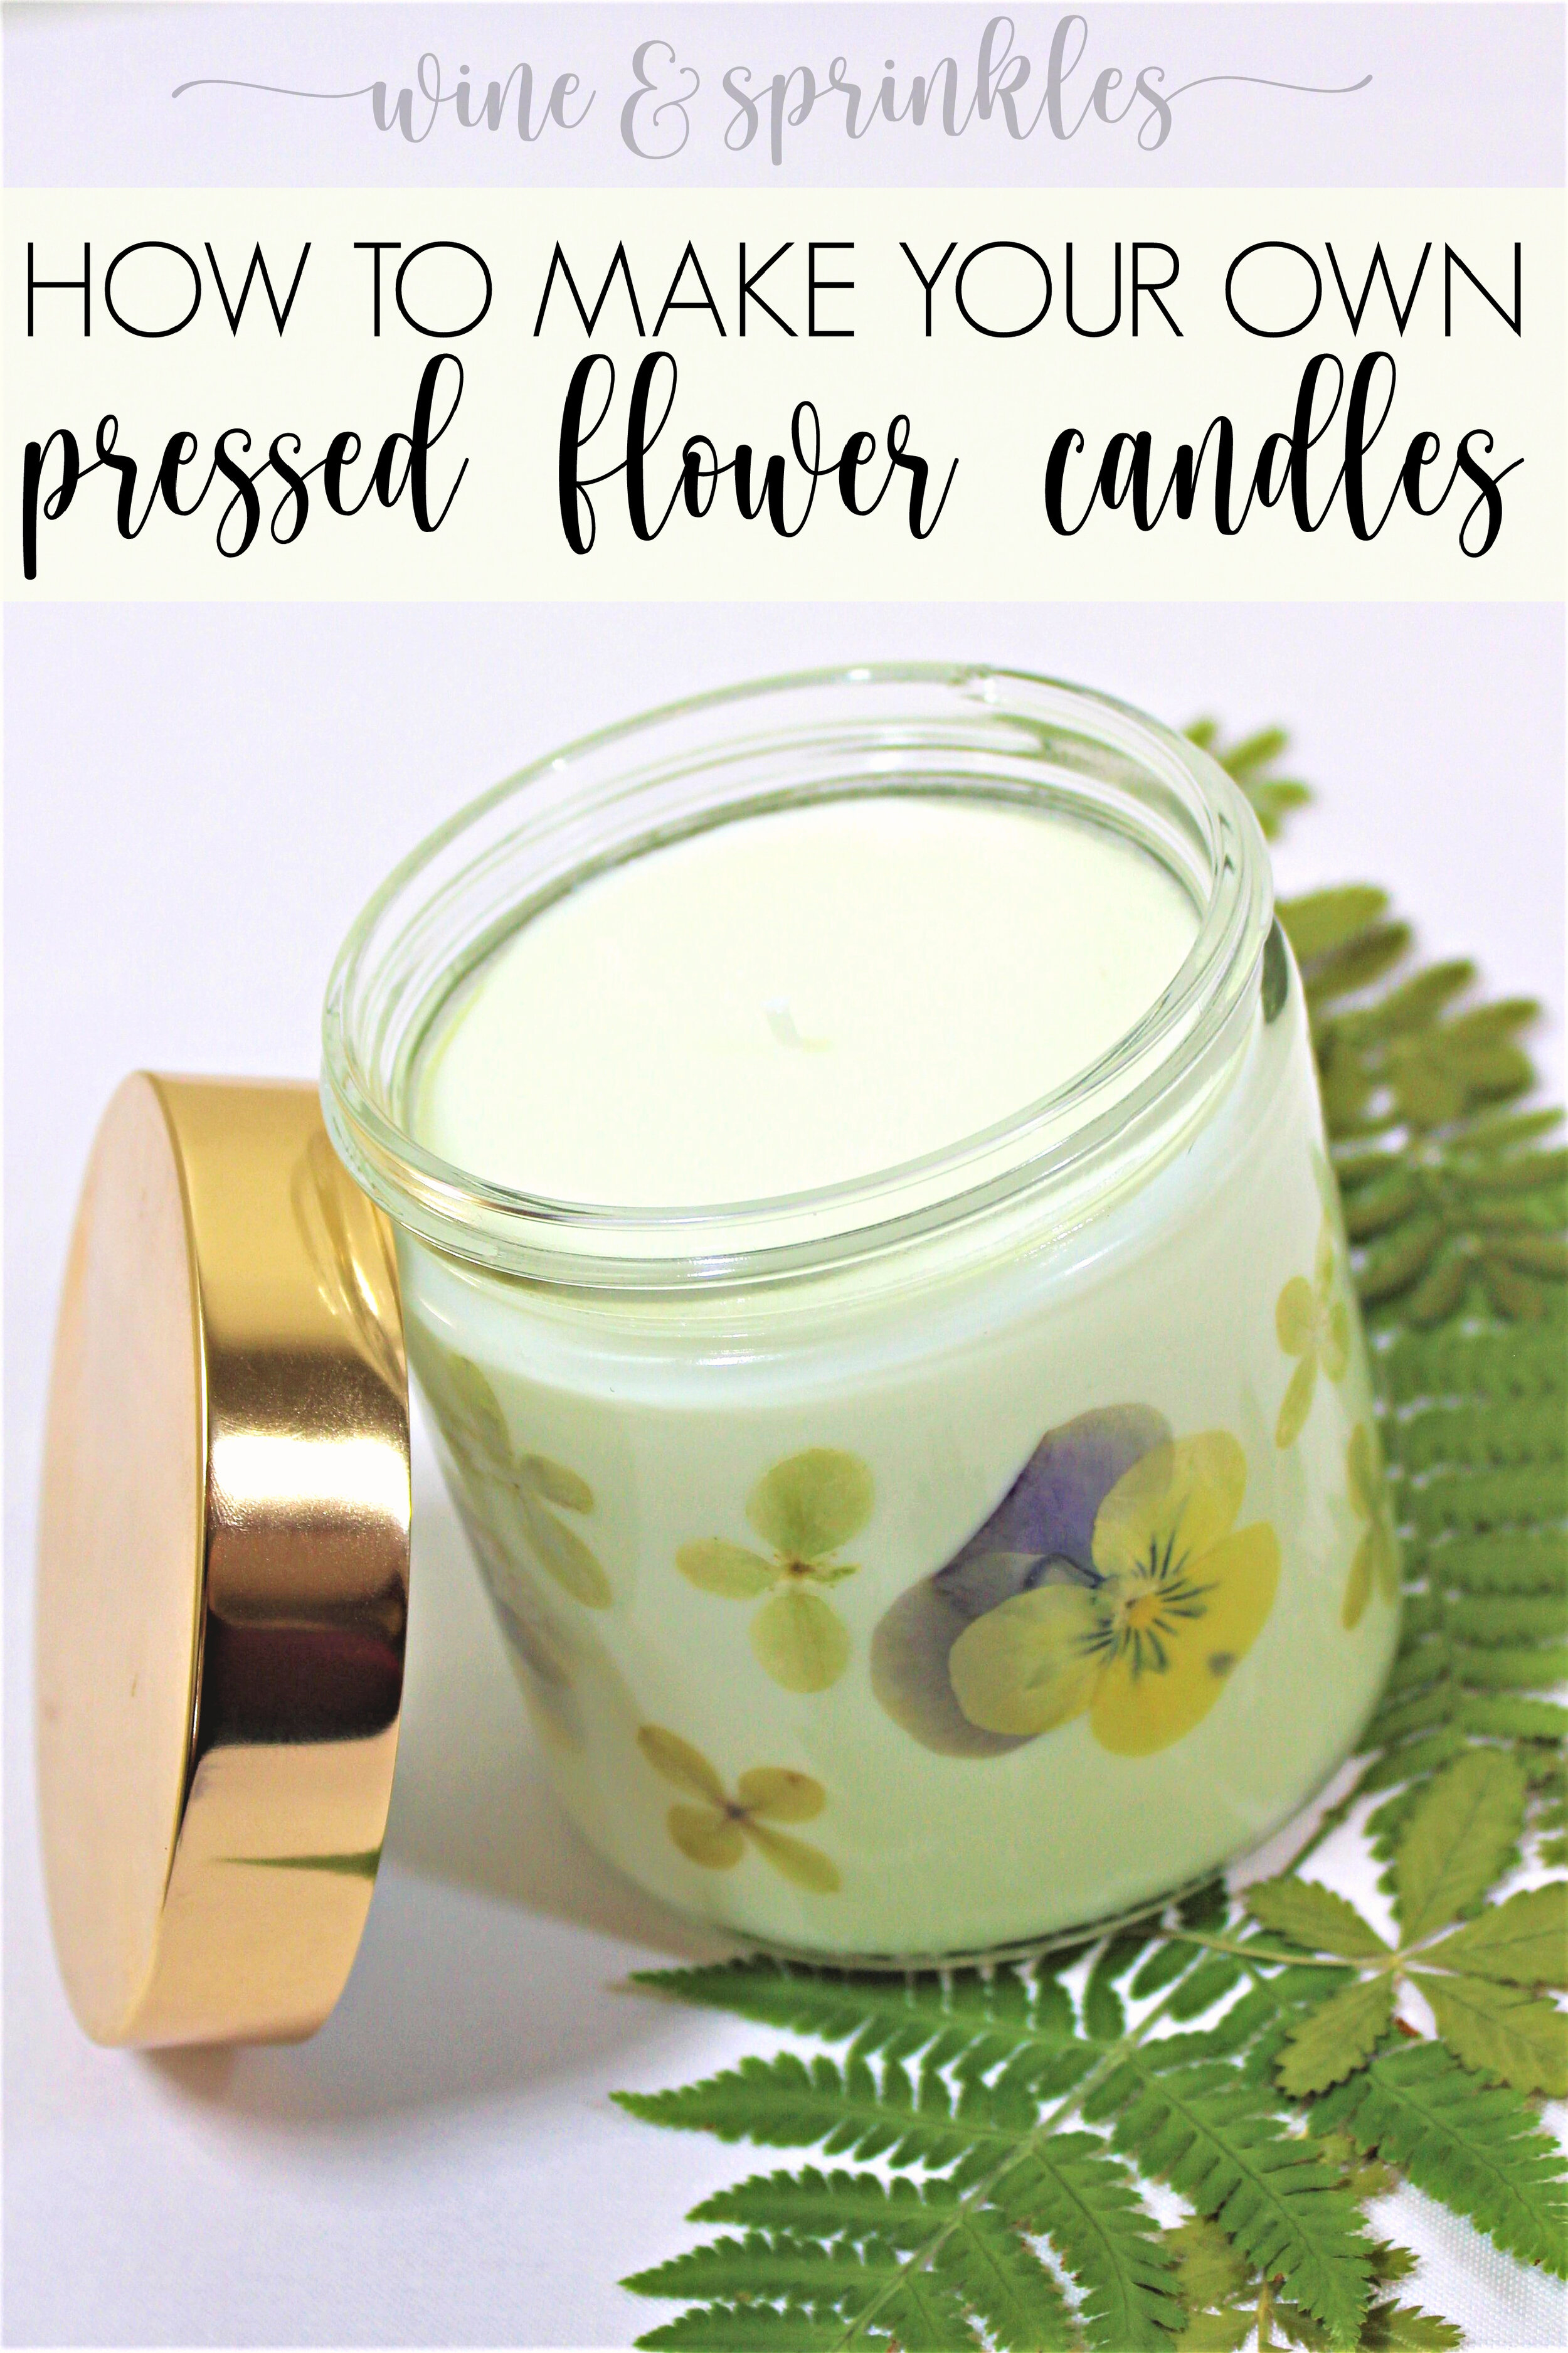 Is it safe to put dried flowers in candles? ( The simple truth